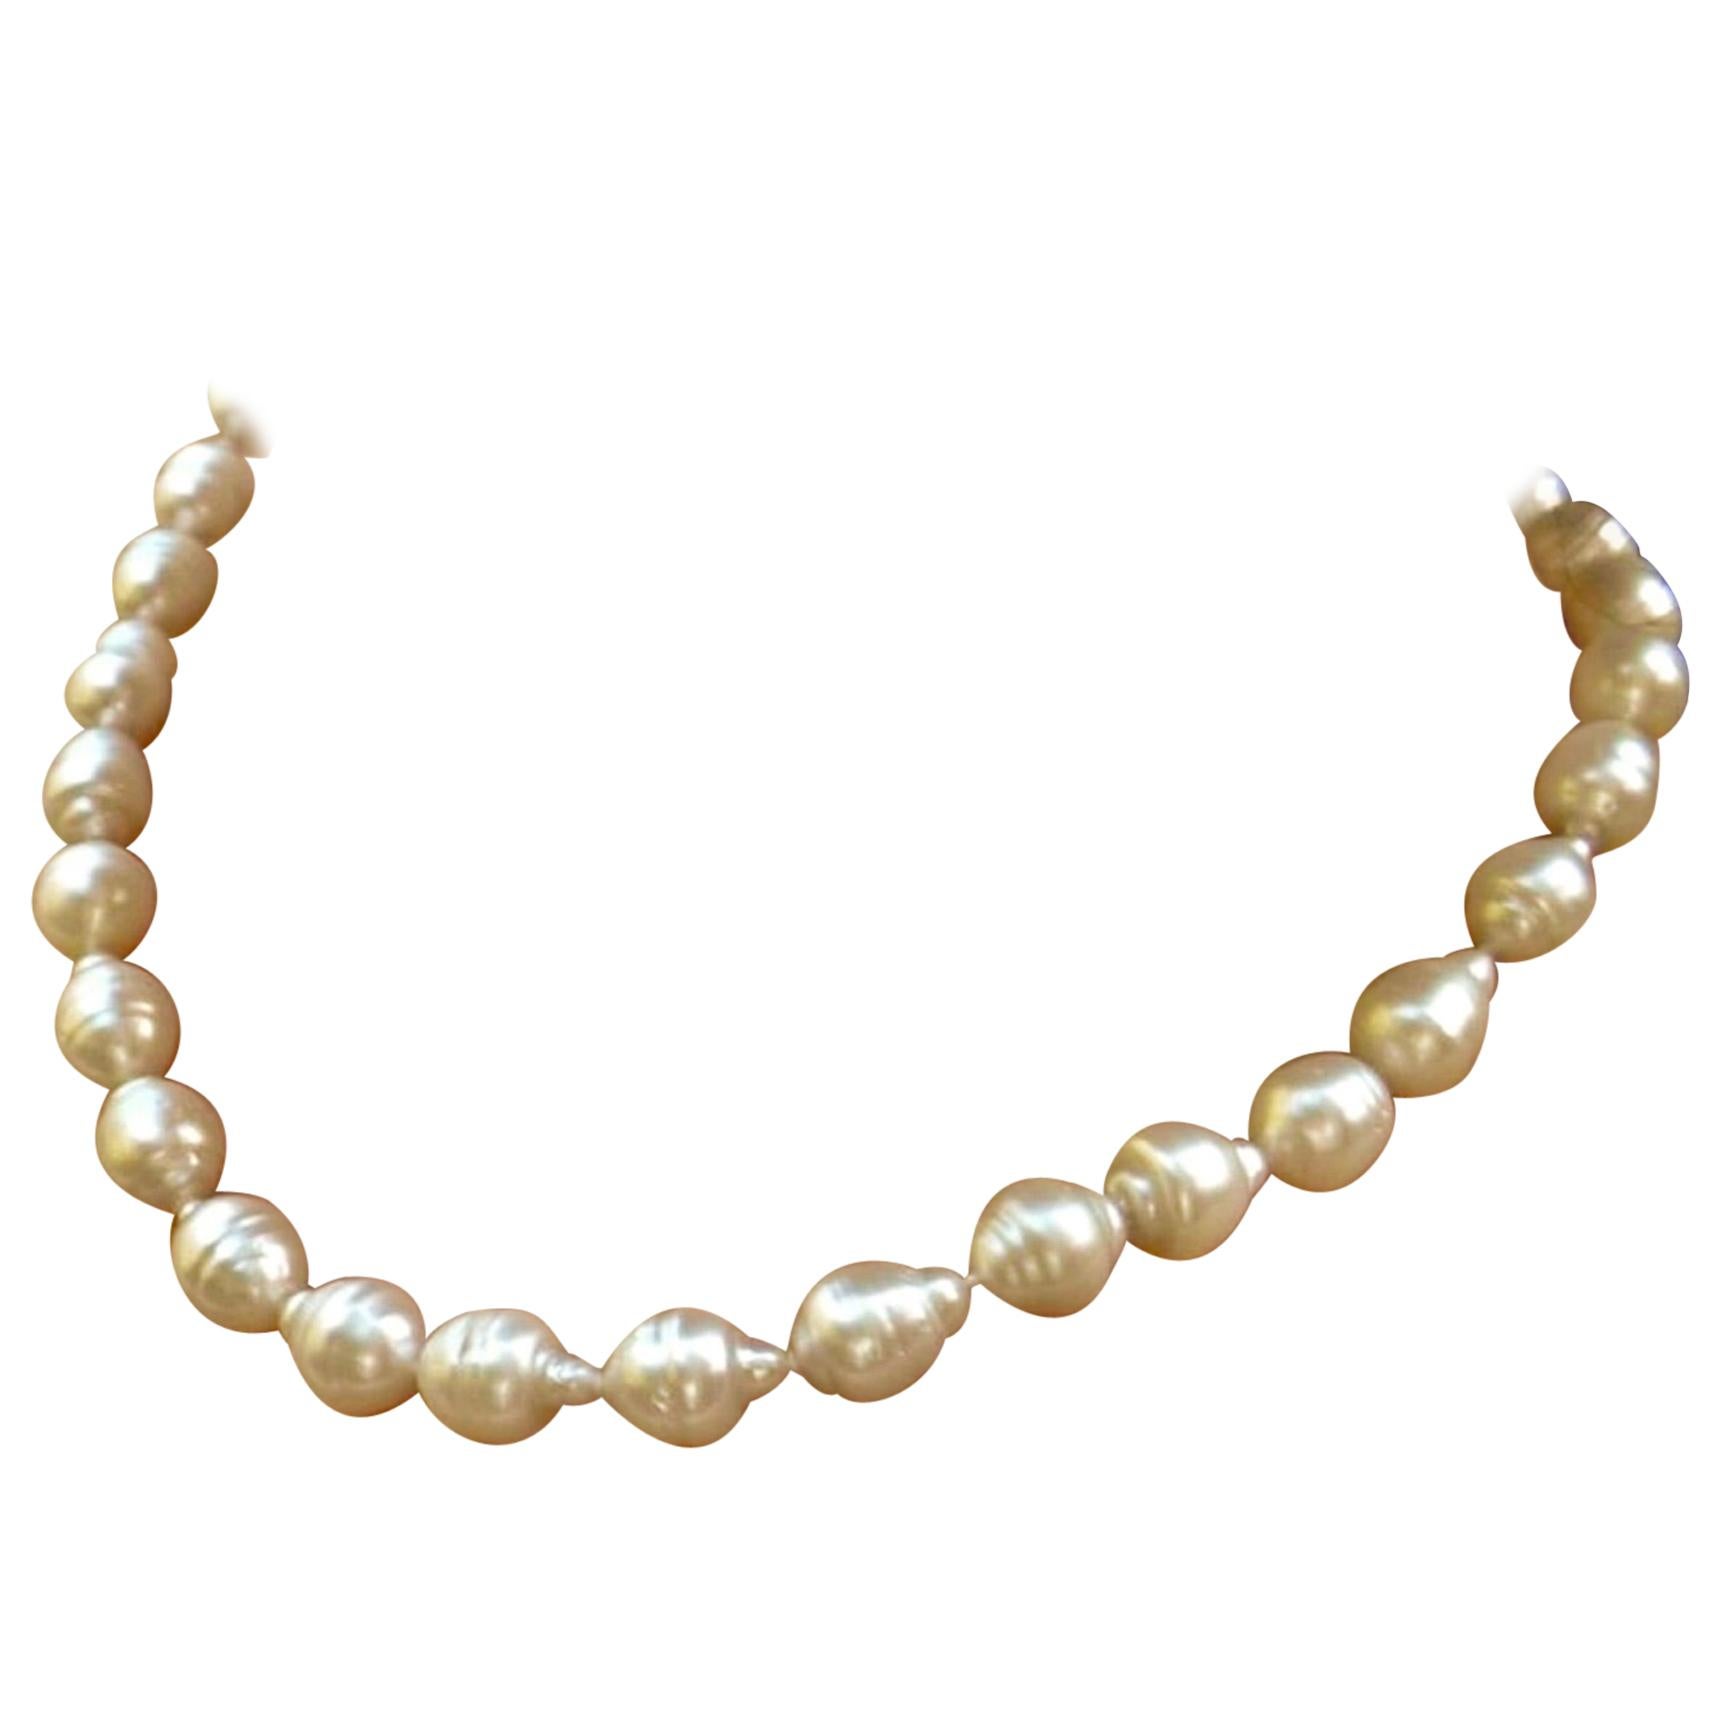 South Sea White Baroque Pearls Necklace